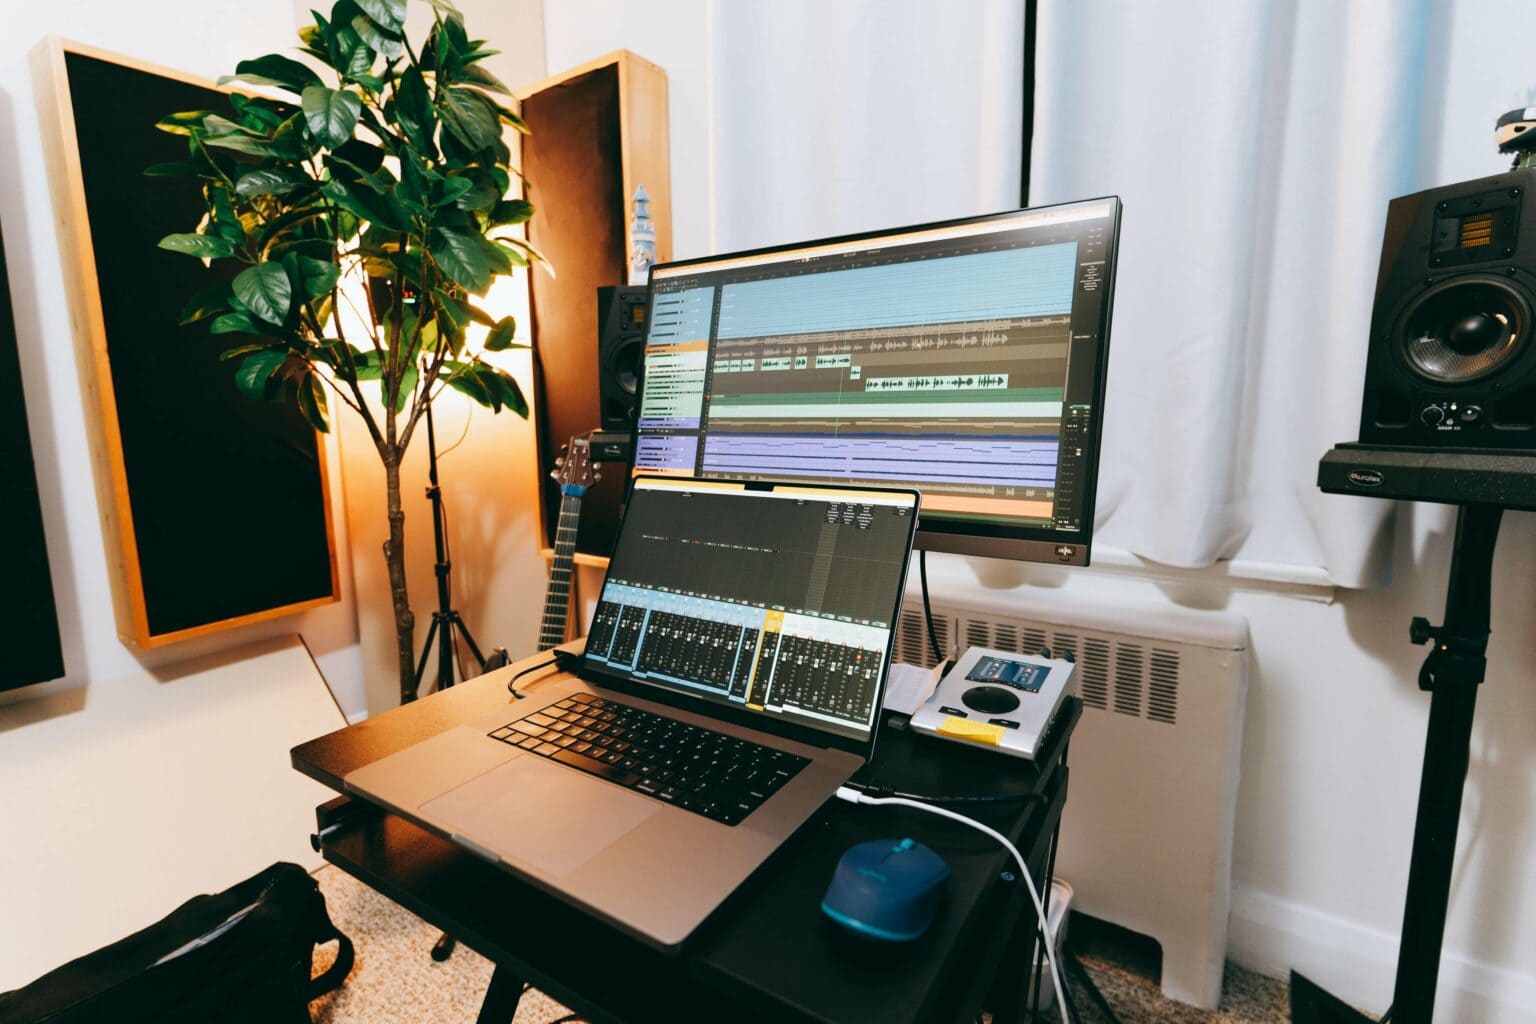 The audio engineer who uses this setup calls their 16-inch M1 Max MacBook